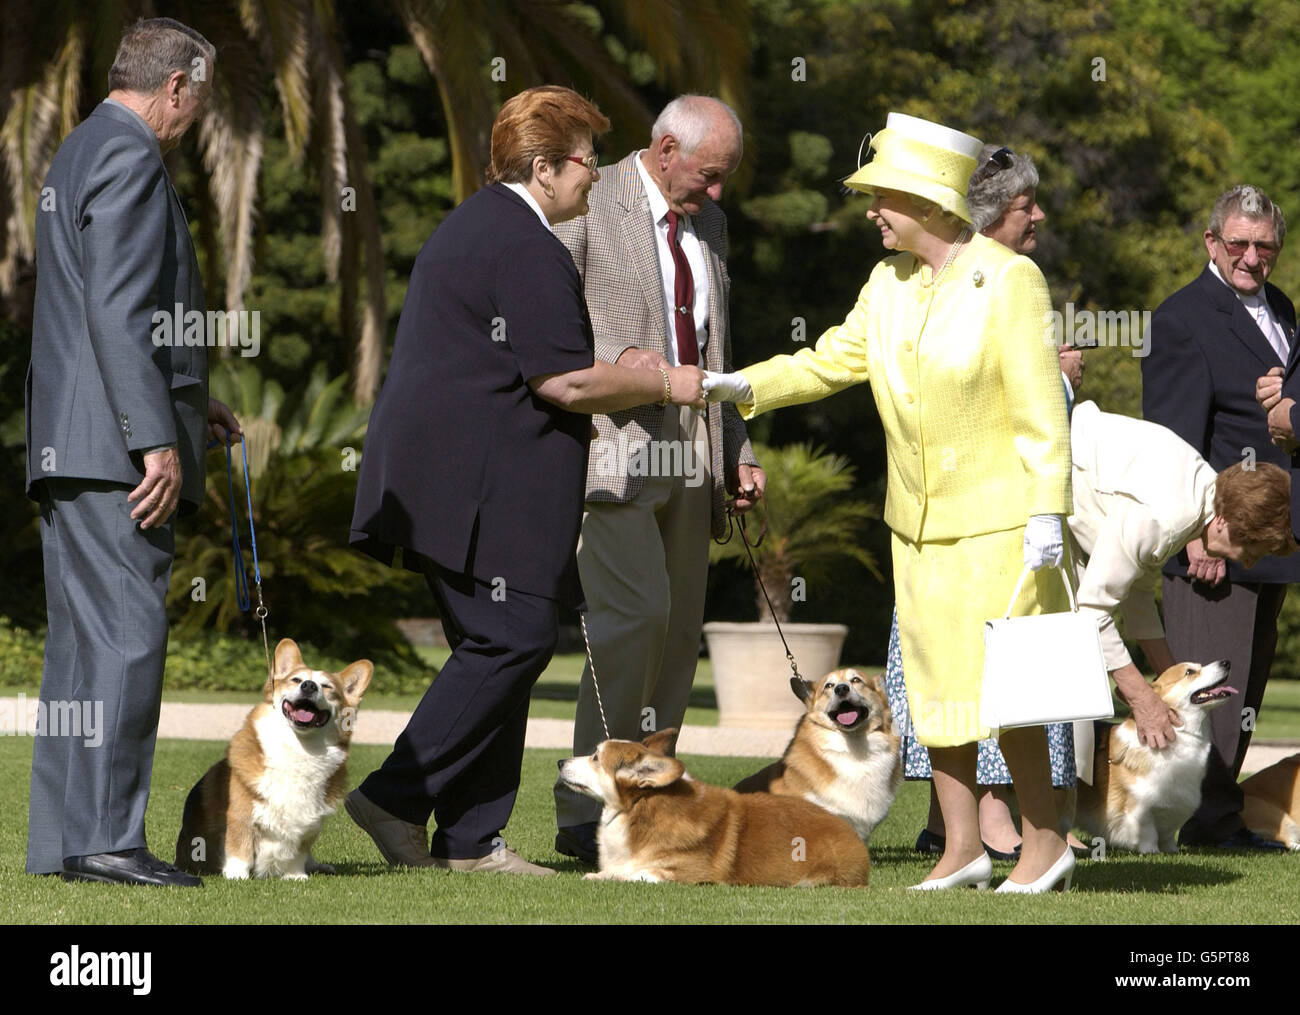 Queen Elizabeth II meets the Adelaide Kennel Club corgi owners on the lawn of Government House in Adelaide, during her tour of Australia, as part of her Jubilee Royal Visit overseas. * The owners and dogs are (L to R) Ken Mansfield with Rocky, Cheryl Sheppard with Jimmy, Harry Painter with with Bobby and Corinne Webb (bending) with Wade. Stock Photo